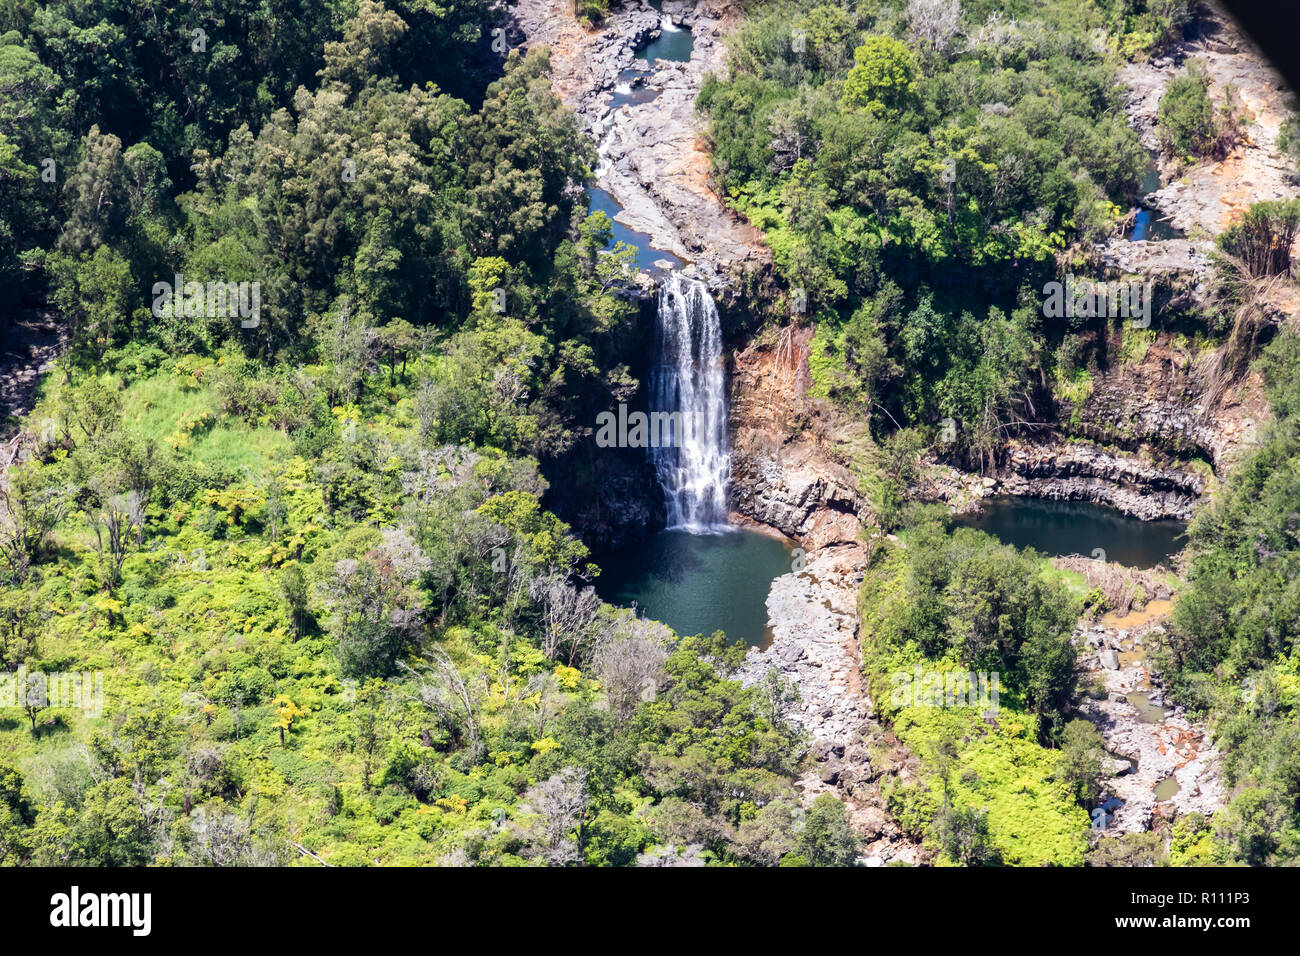 Aerial view of waterfall near Hilo, Hawaii. Water flows over rock into pool below; Rainforest crowds both banks. Second pool is nearby. Stock Photo